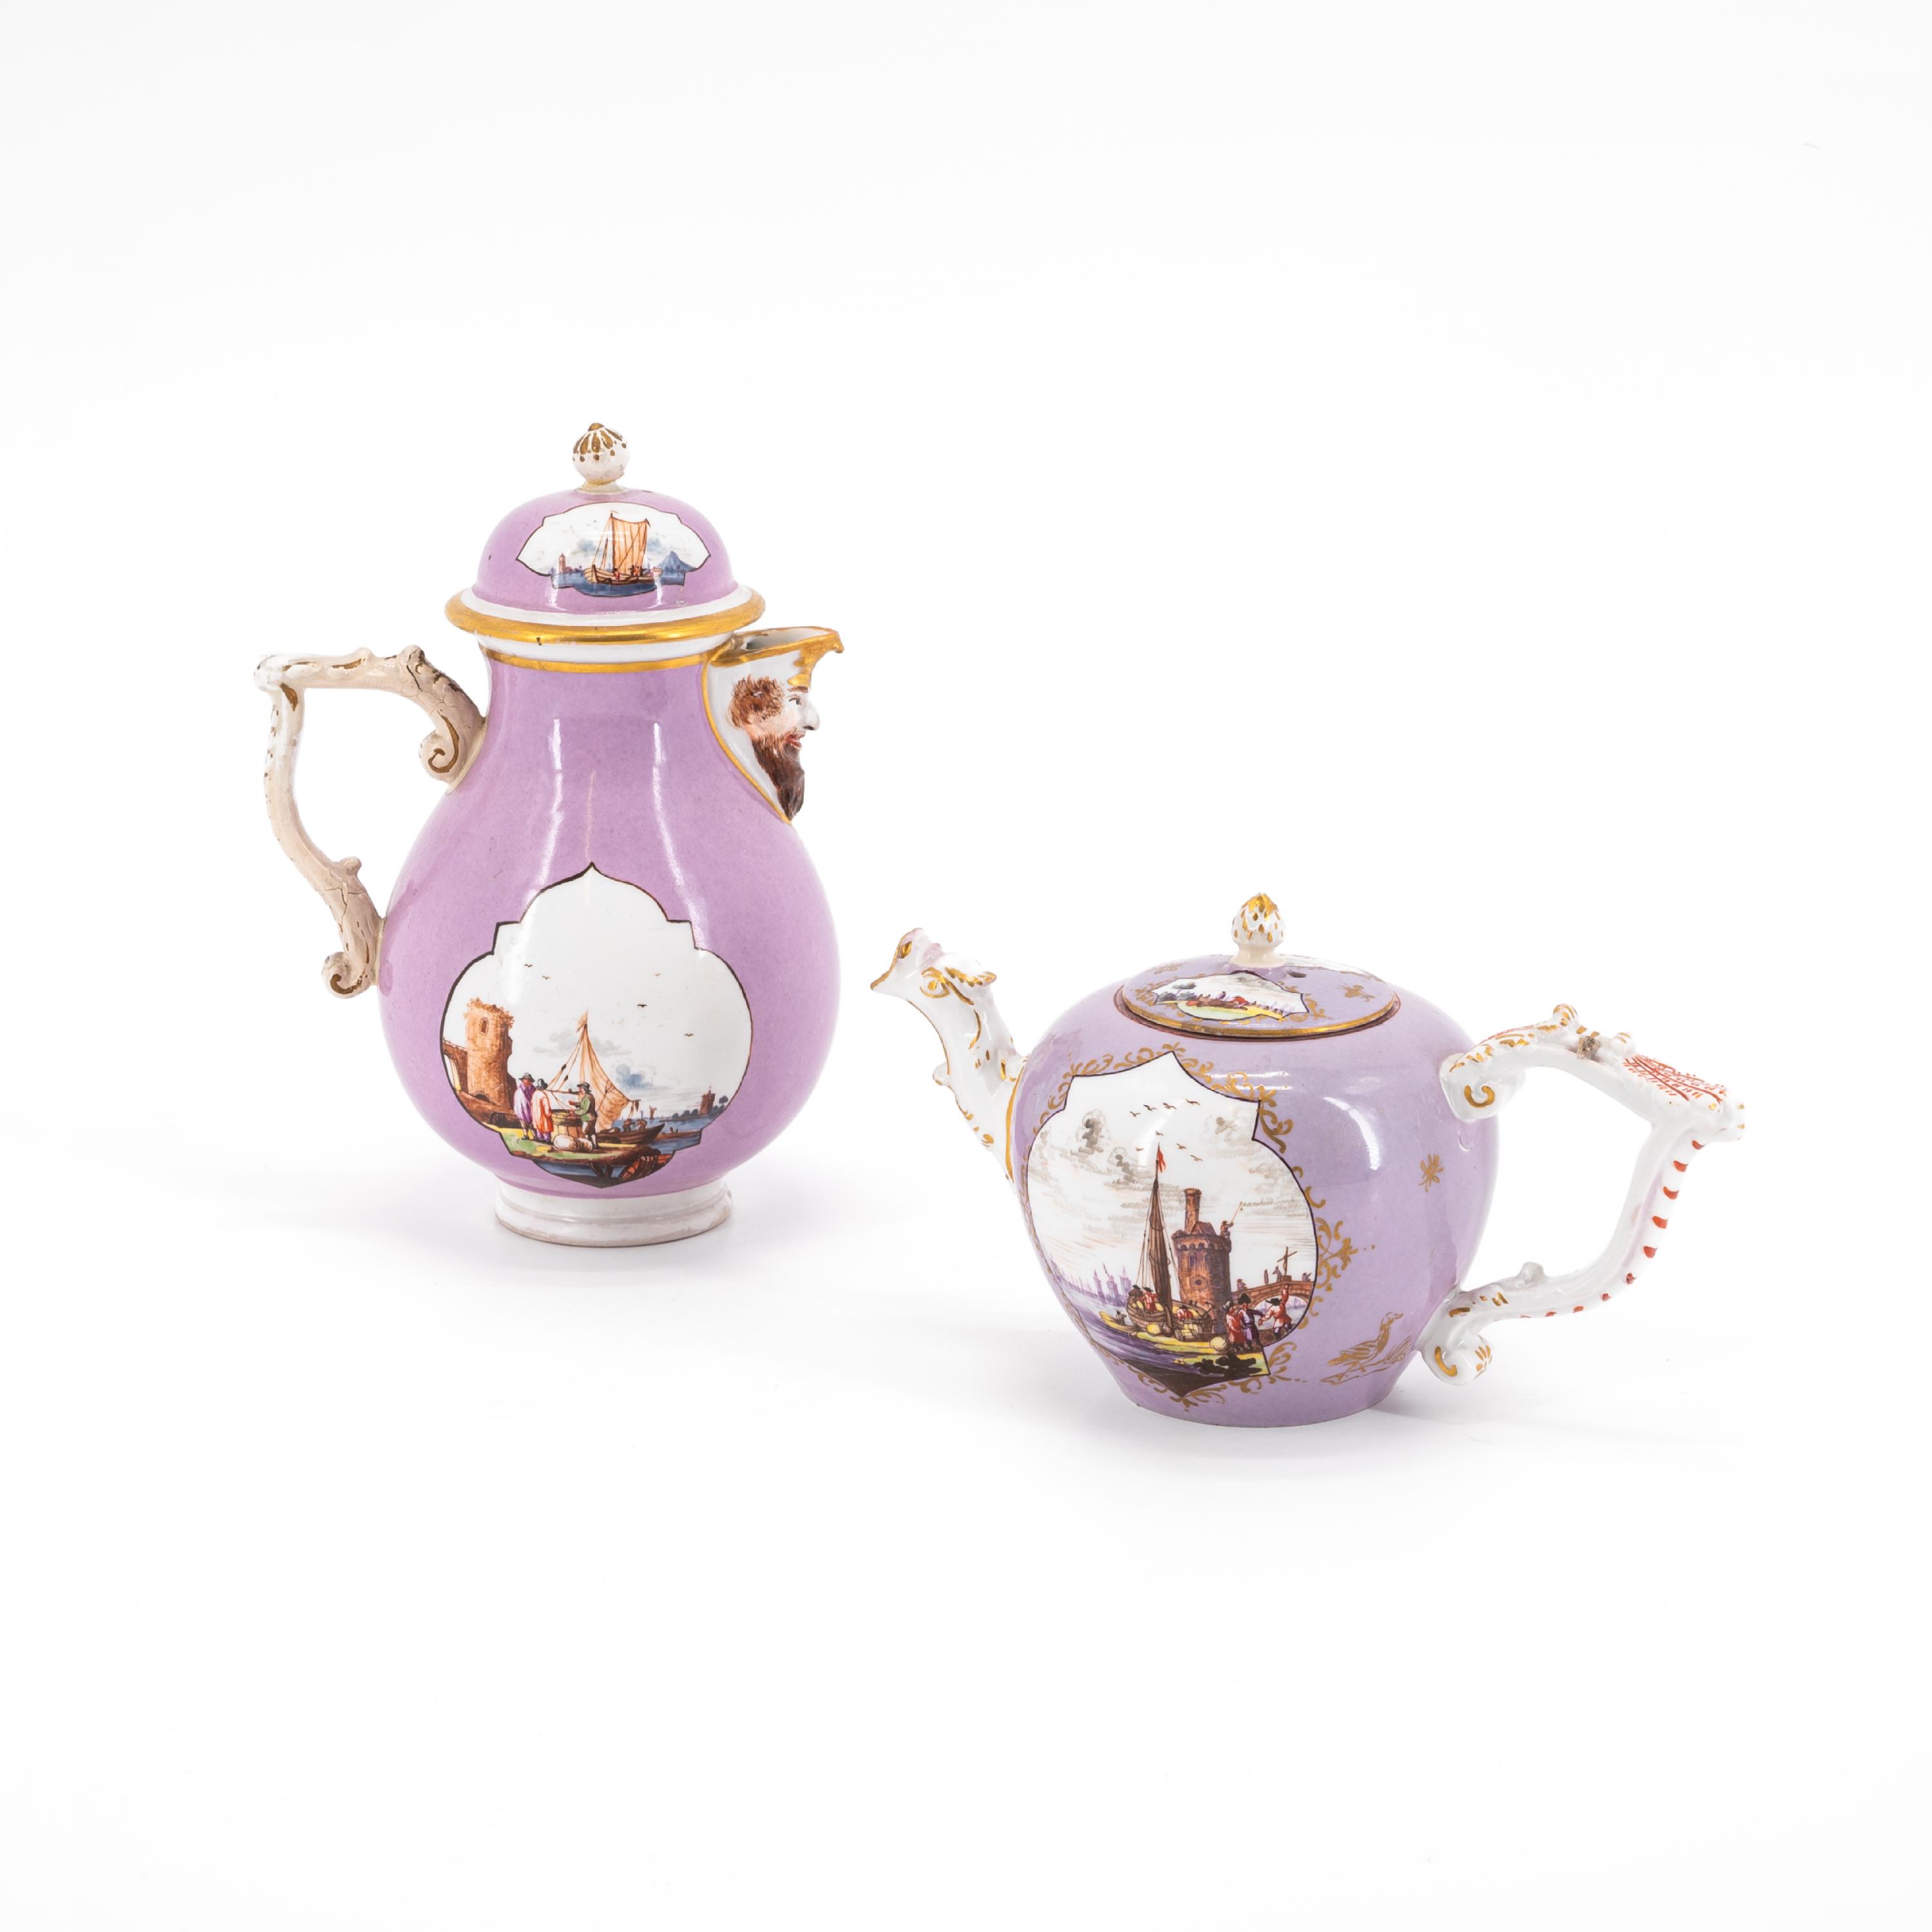 PORCELAIN TEAPOT AND COFFEEPOT WITH PURPLE GROUND AND MERCHANTS NAVY SCENES